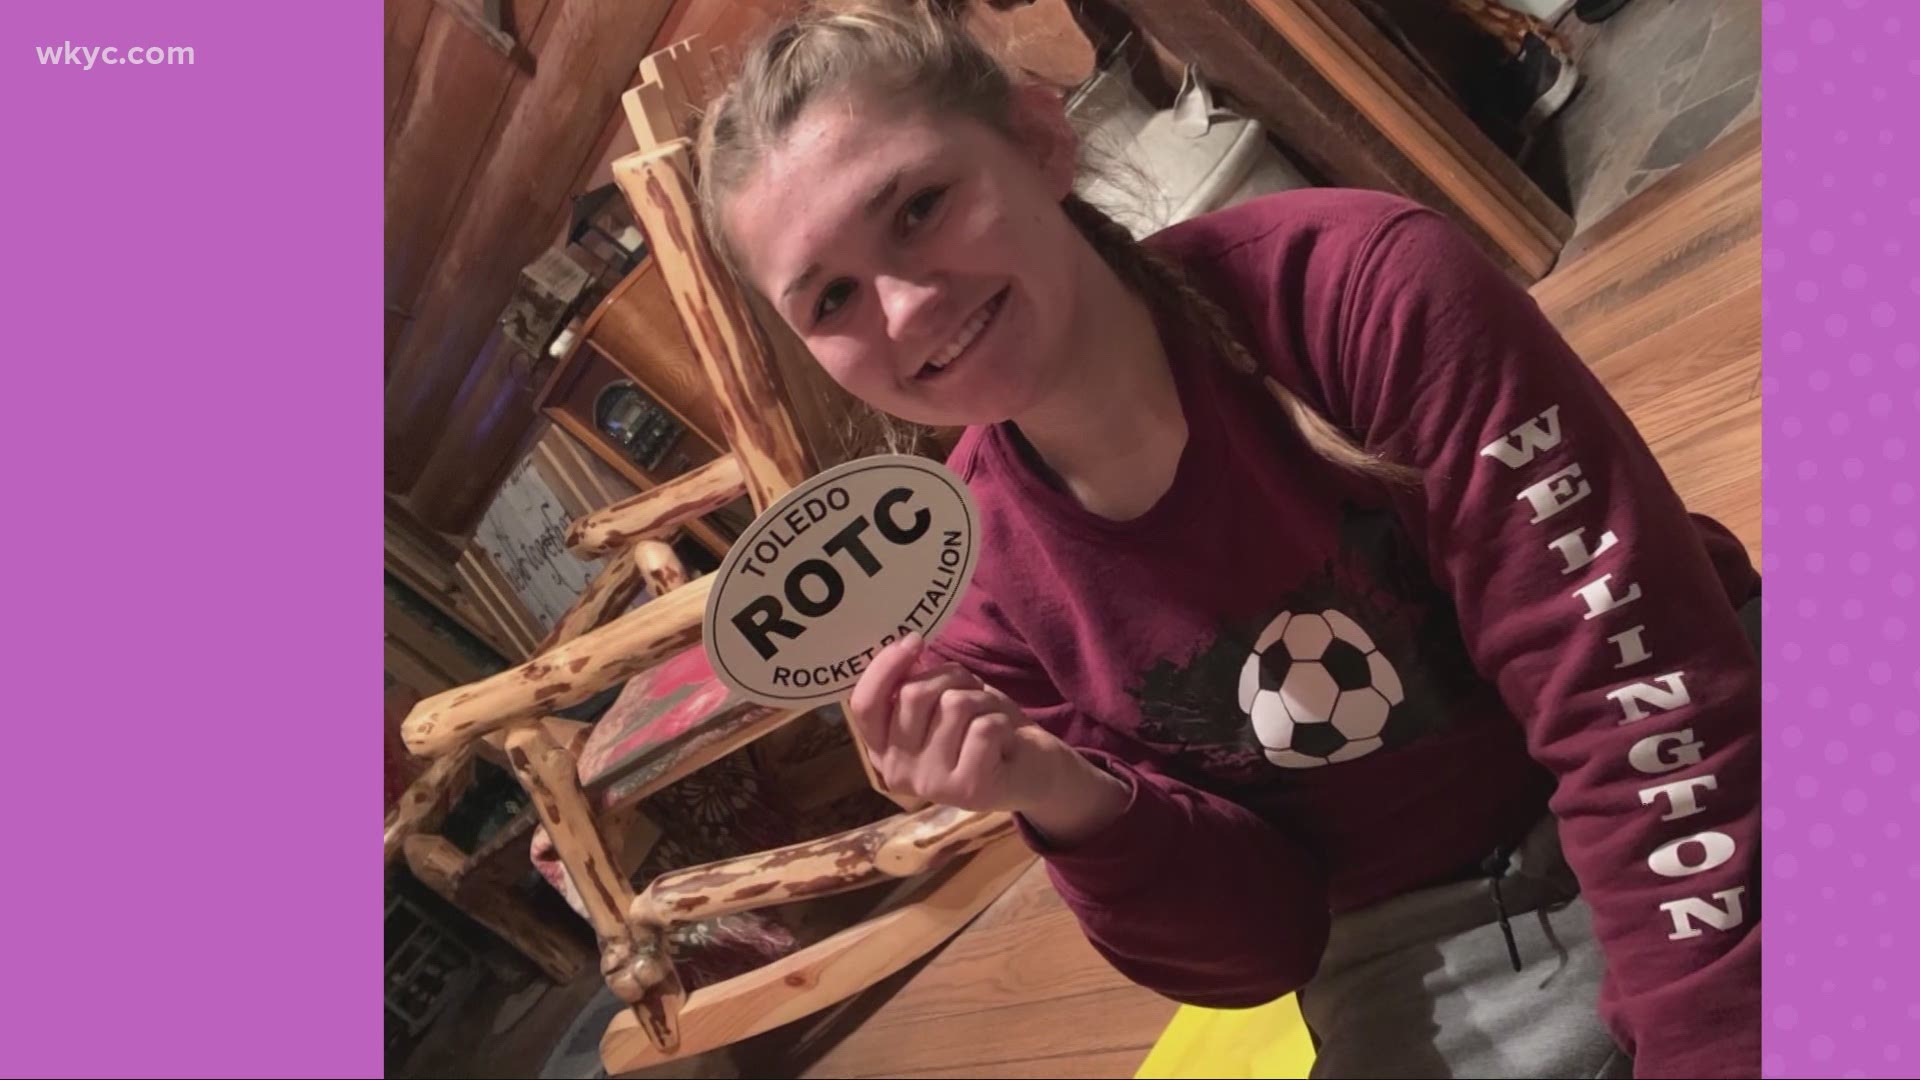 She was a history maker on the Wellington varsity football team, now she's living through history in college. Jim Donovan has an update on Grace Dudziak.